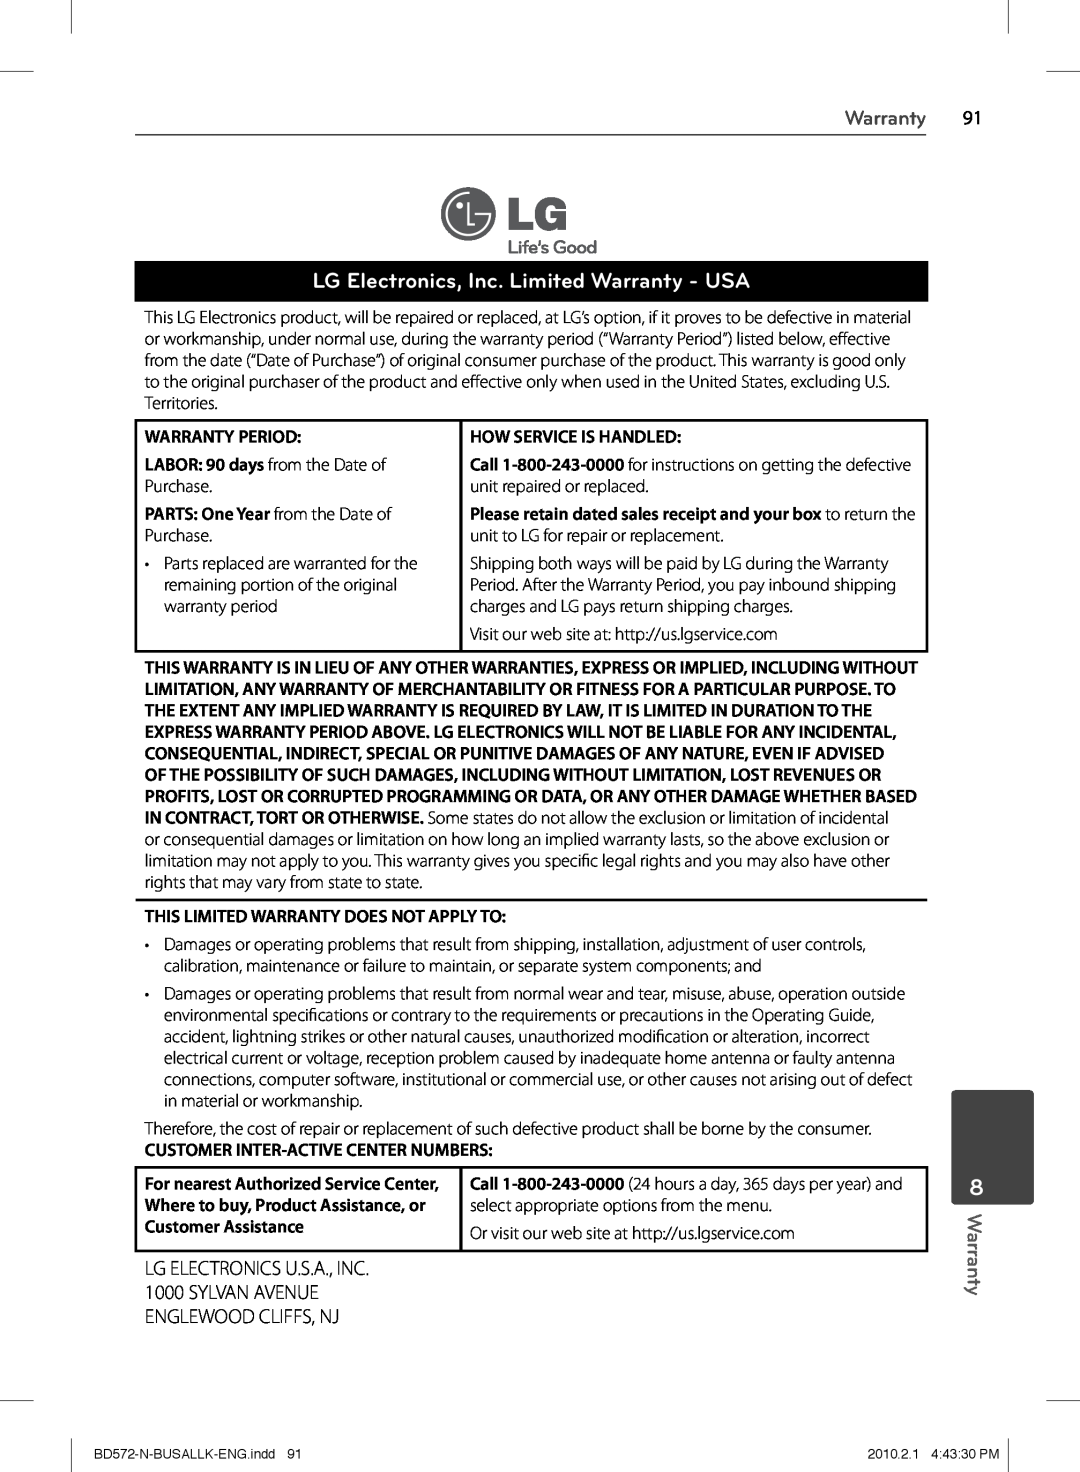 LG Electronics BD570 owner manual LG Electronics, Inc. Limited Warranty - USA, Warranty Period, How Service Is Handled 